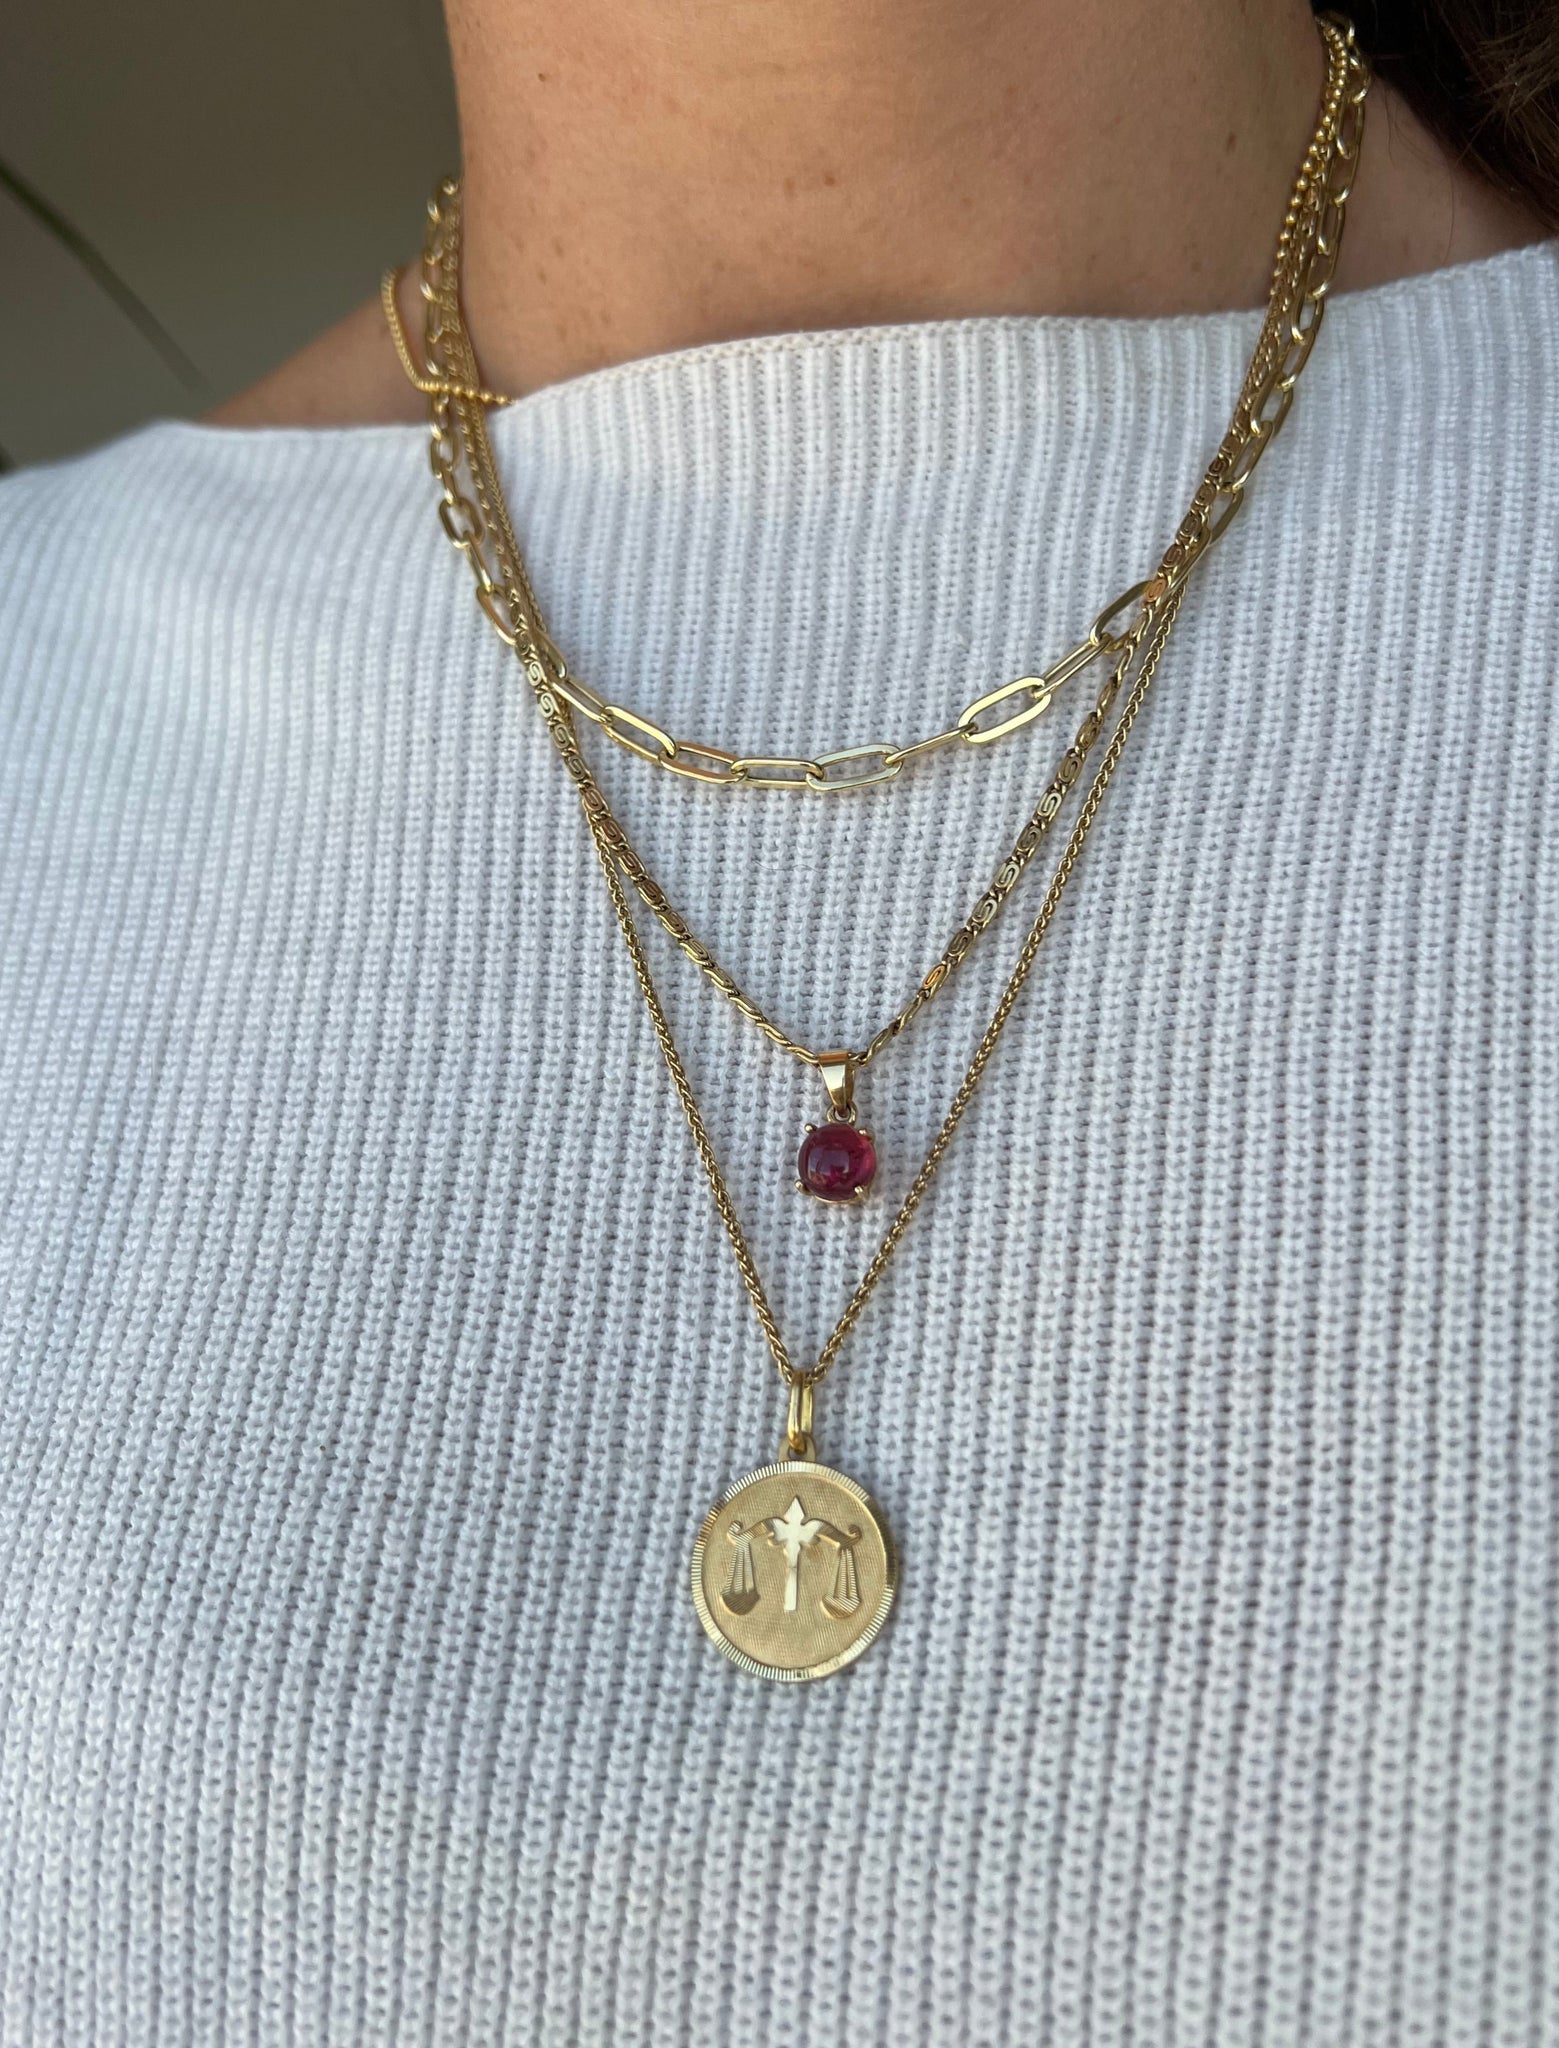 Vintage 18K Libra medallion pendant from Lico Jewelry in Montreal, styled with other gold necklaces and charms.